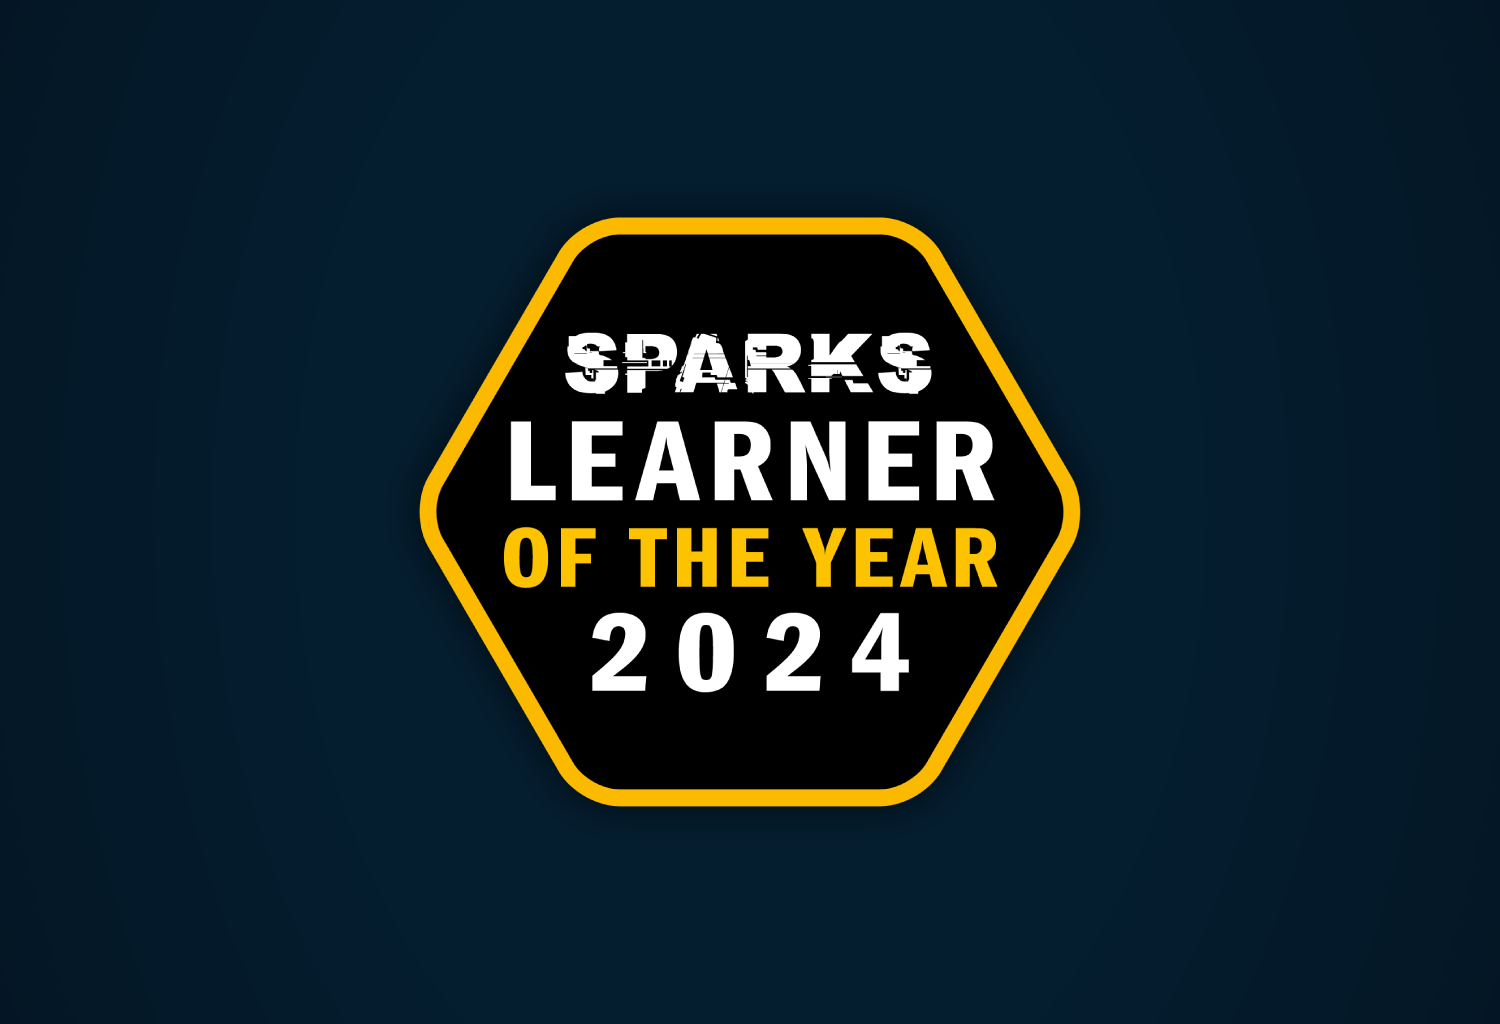 SPARKS Learner of the Year 2024 BG News